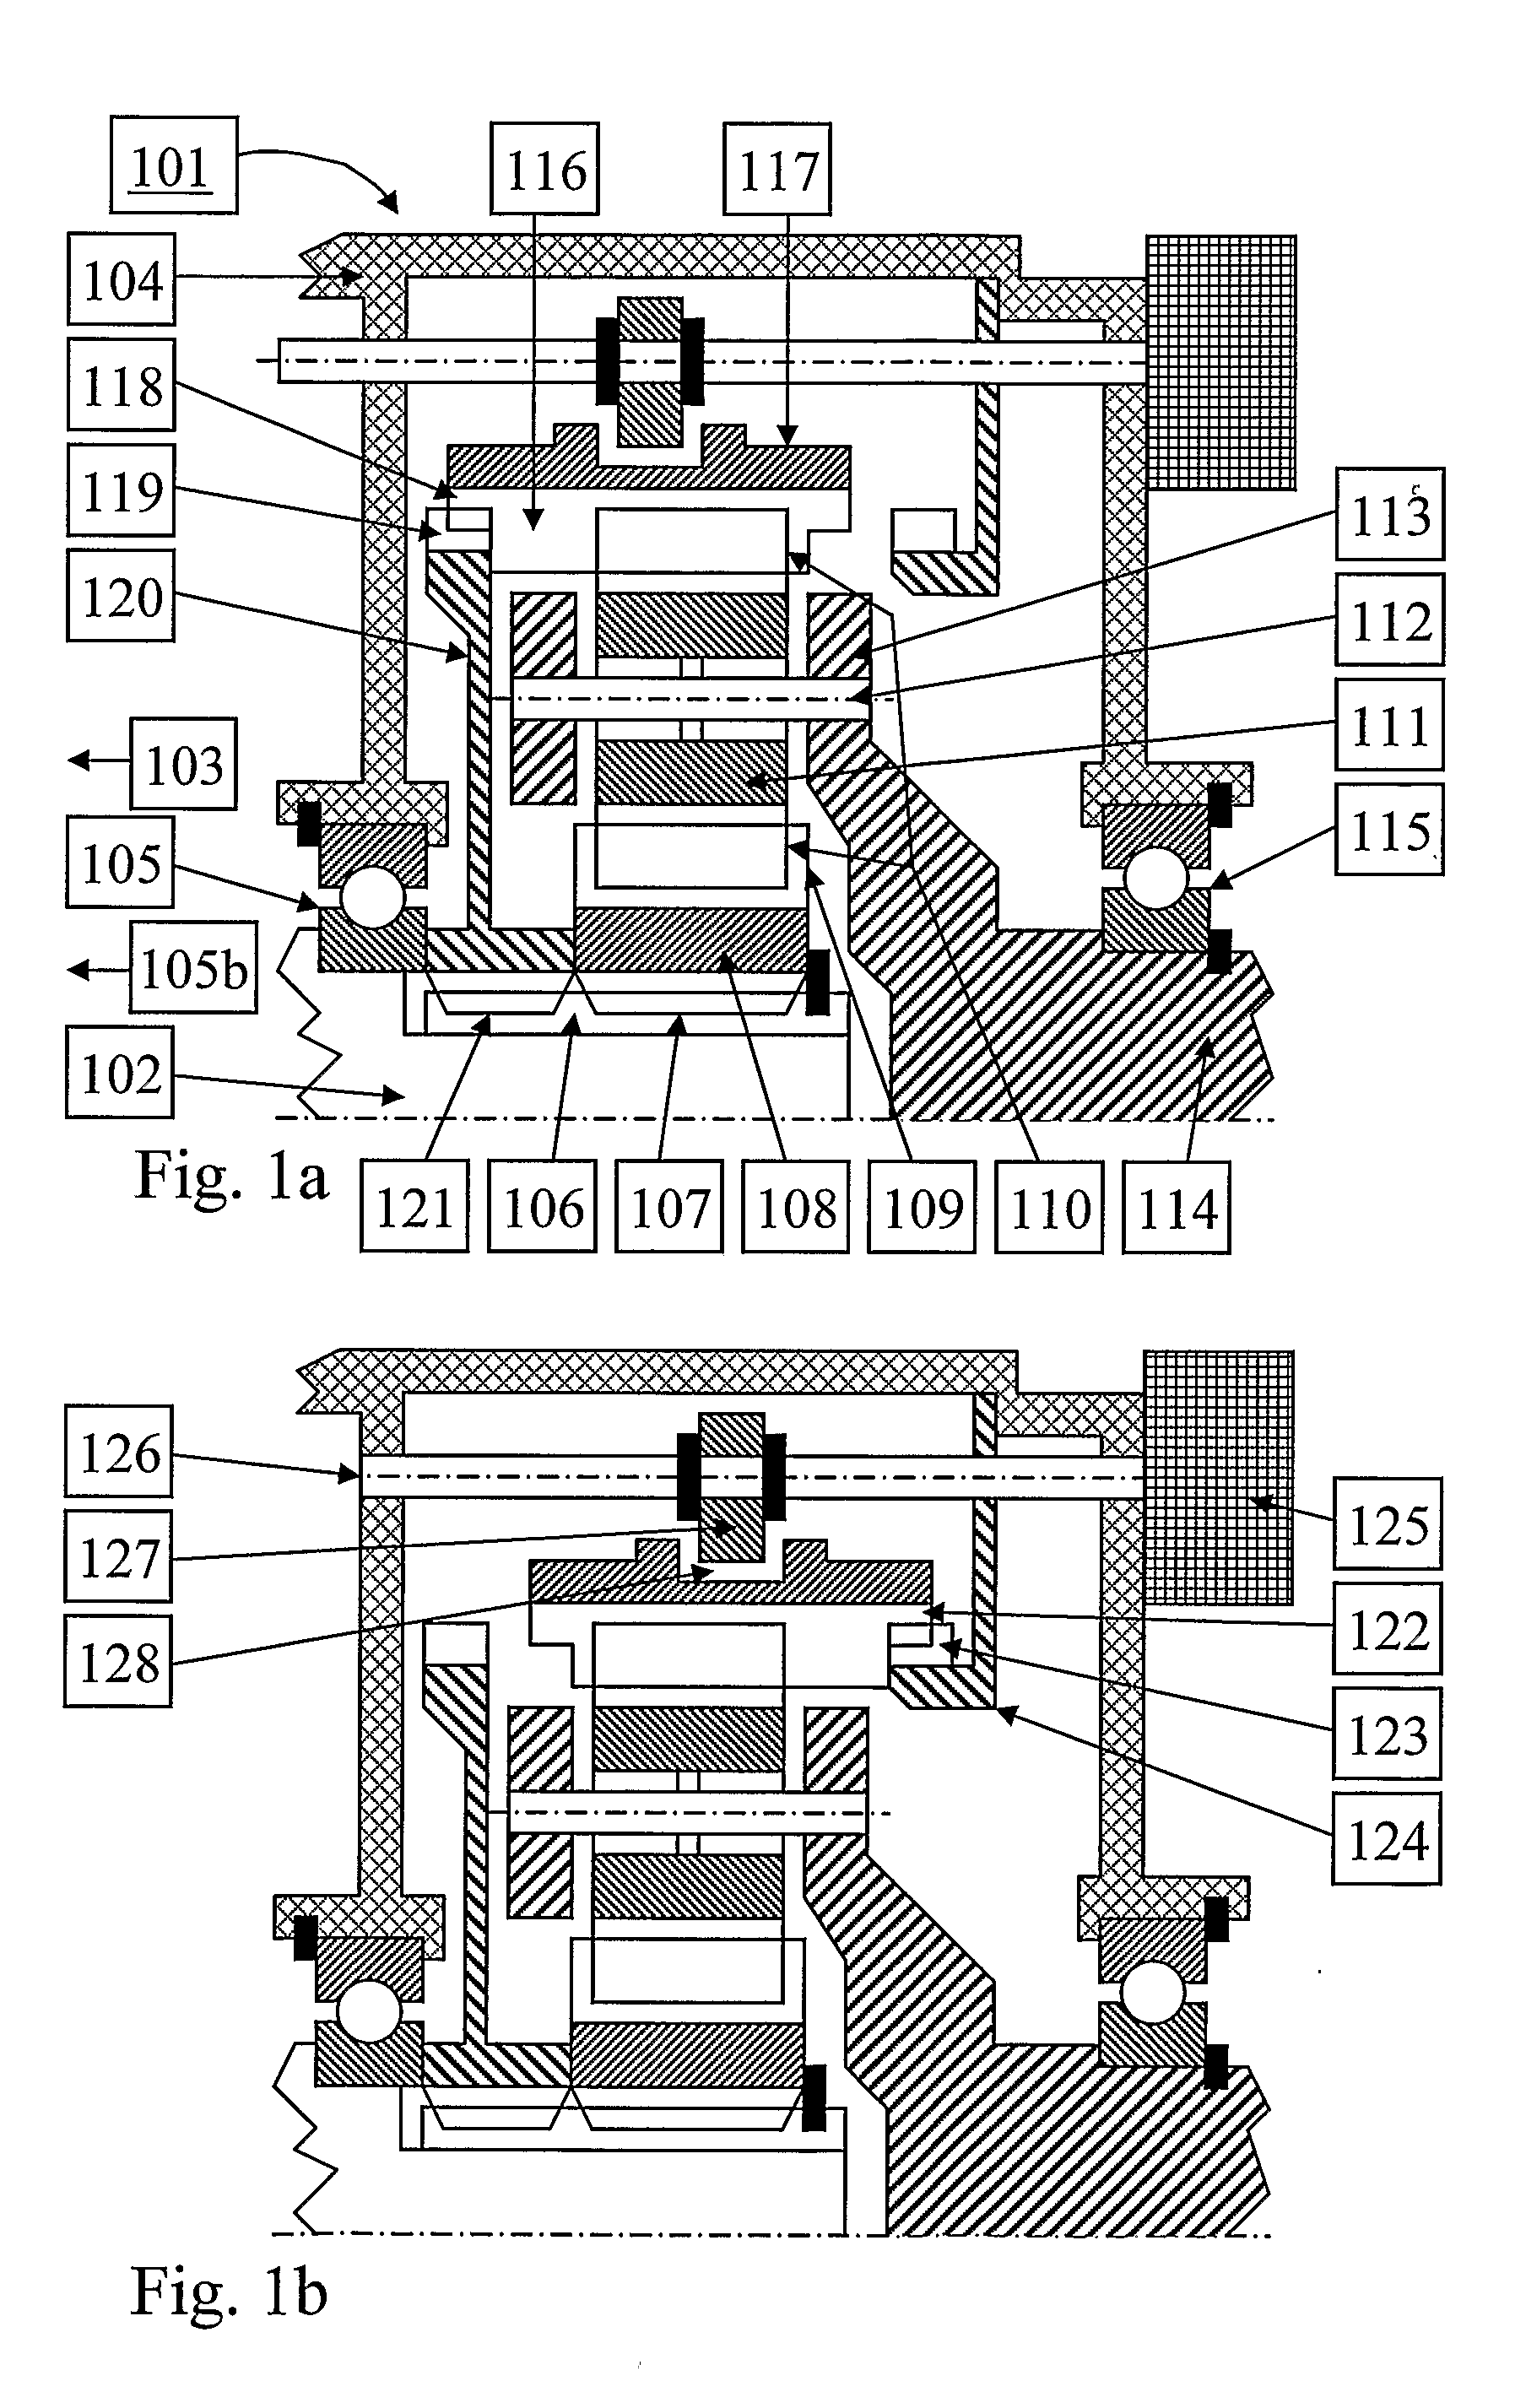 Device for Preventing Gear Hopout in a Tooth Clutch in a Vehicle Transmission